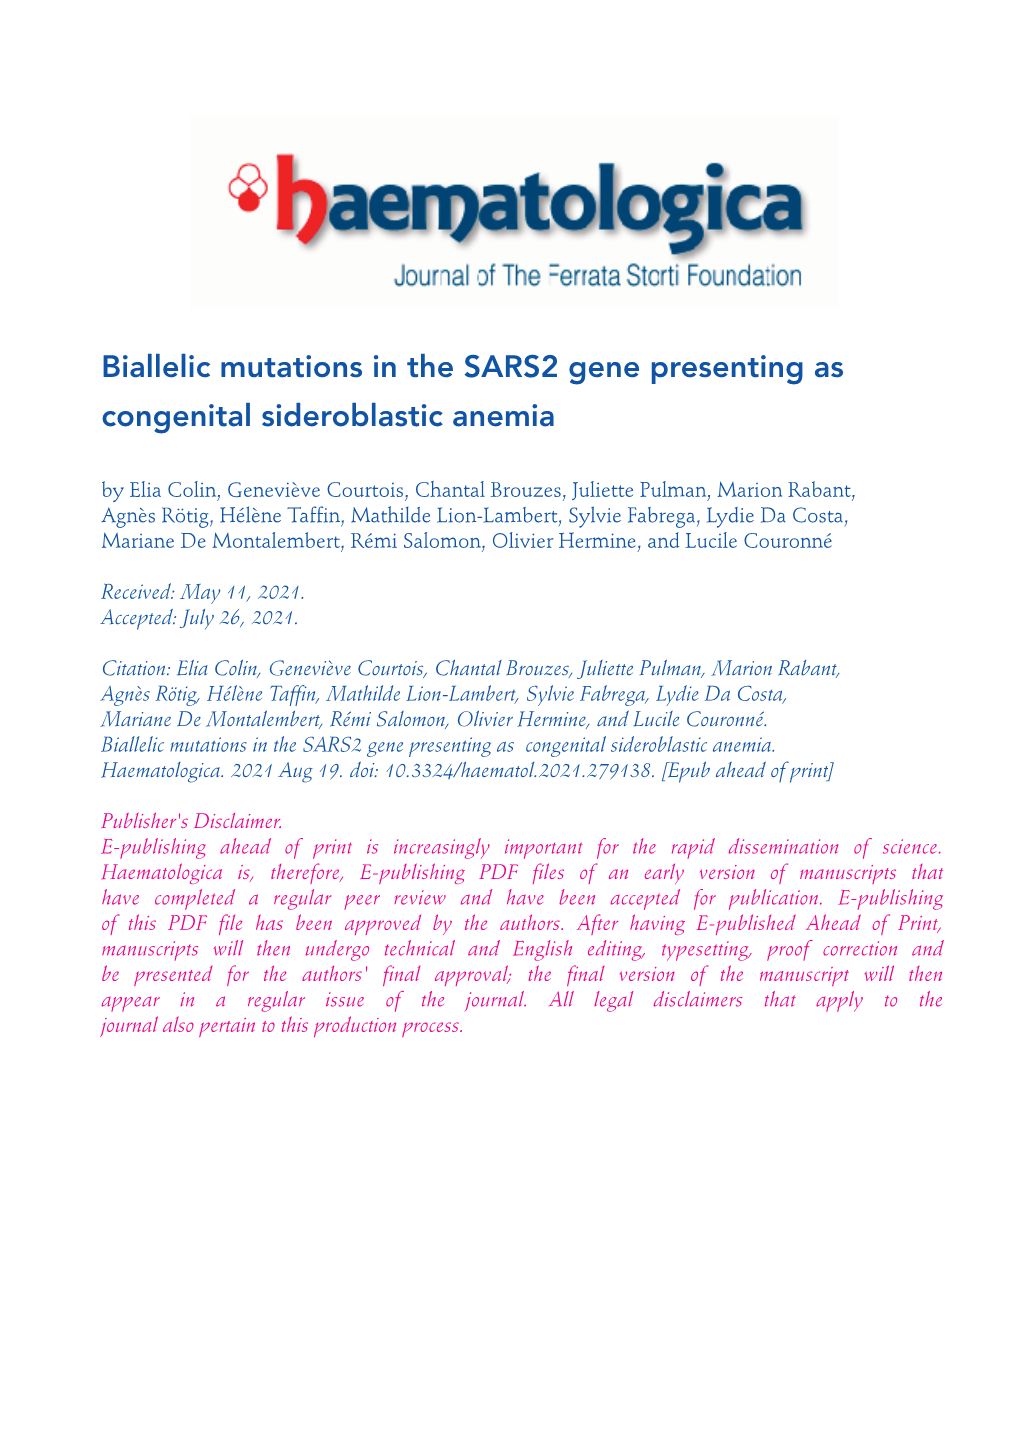 Biallelic Mutations in the SARS2 Gene Presenting As Congenital